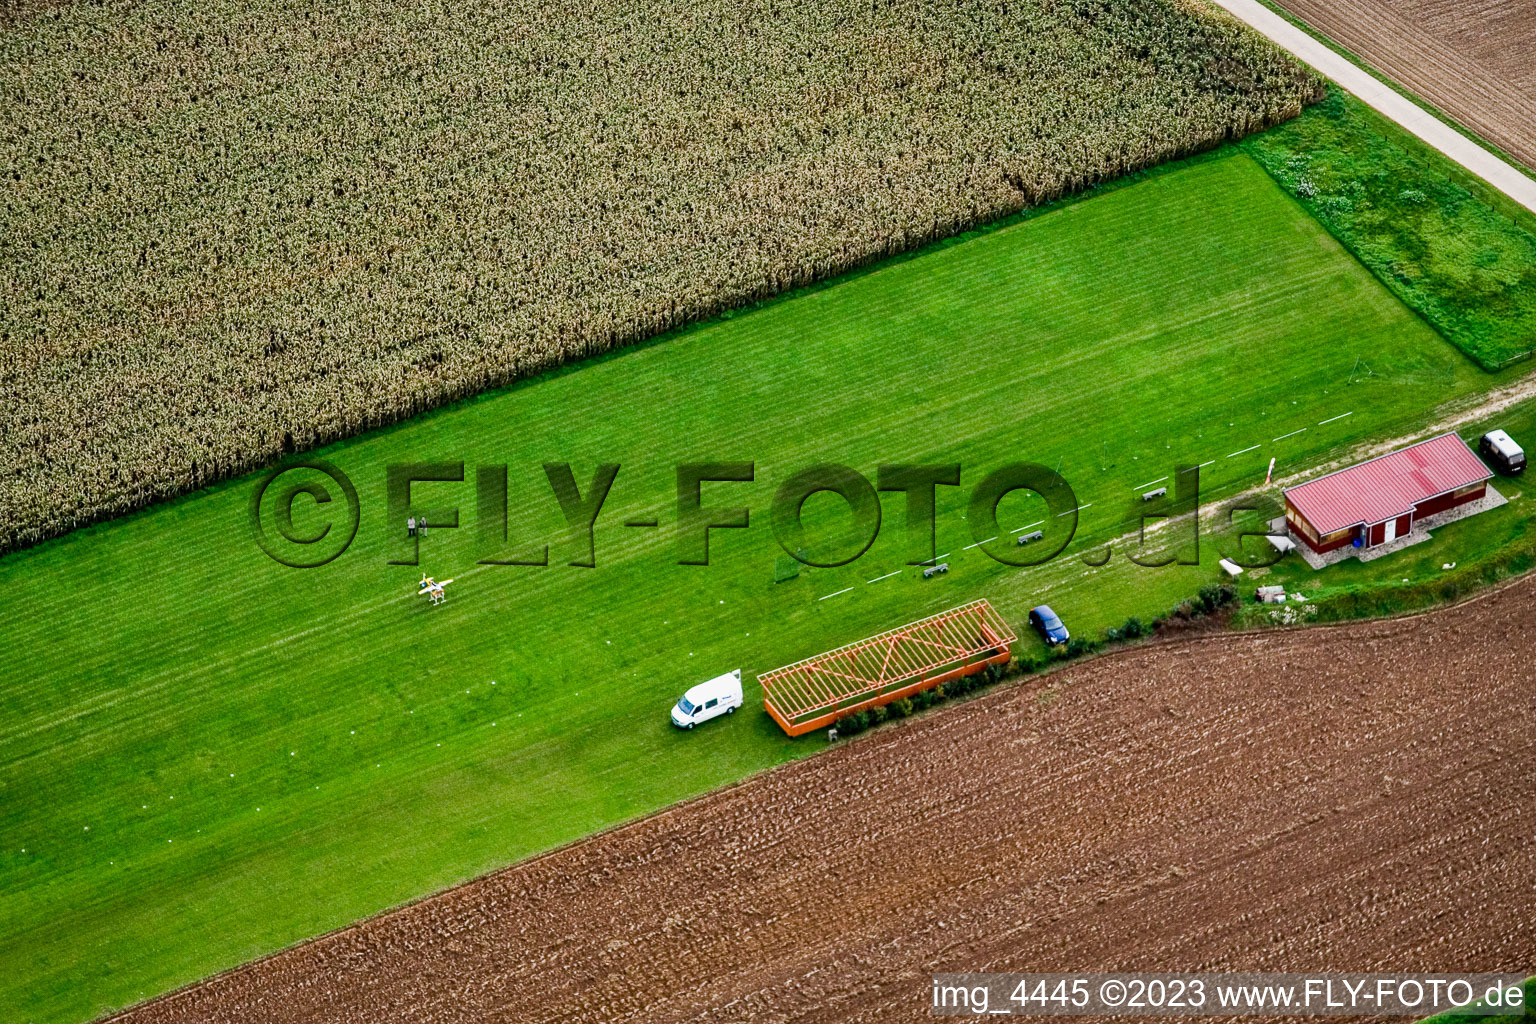 Bird's eye view of Model airfield in Freckenfeld in the state Rhineland-Palatinate, Germany